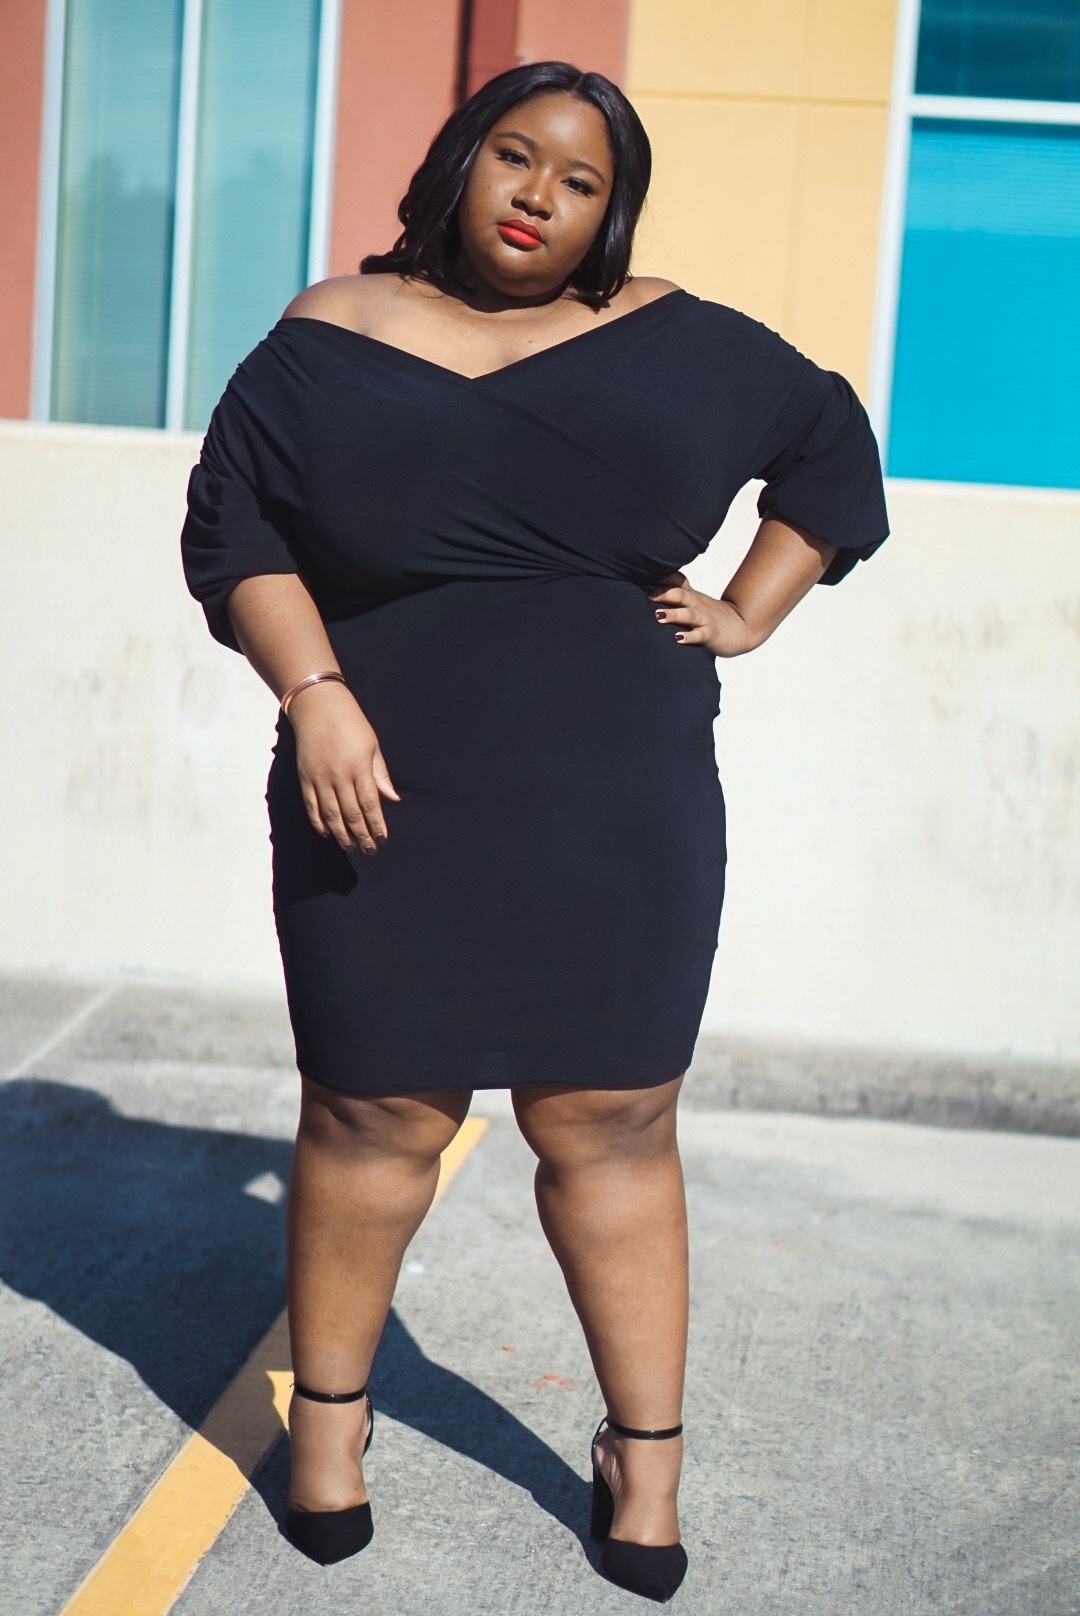 How To Be A Sexy Plus Size Woman - From Head To